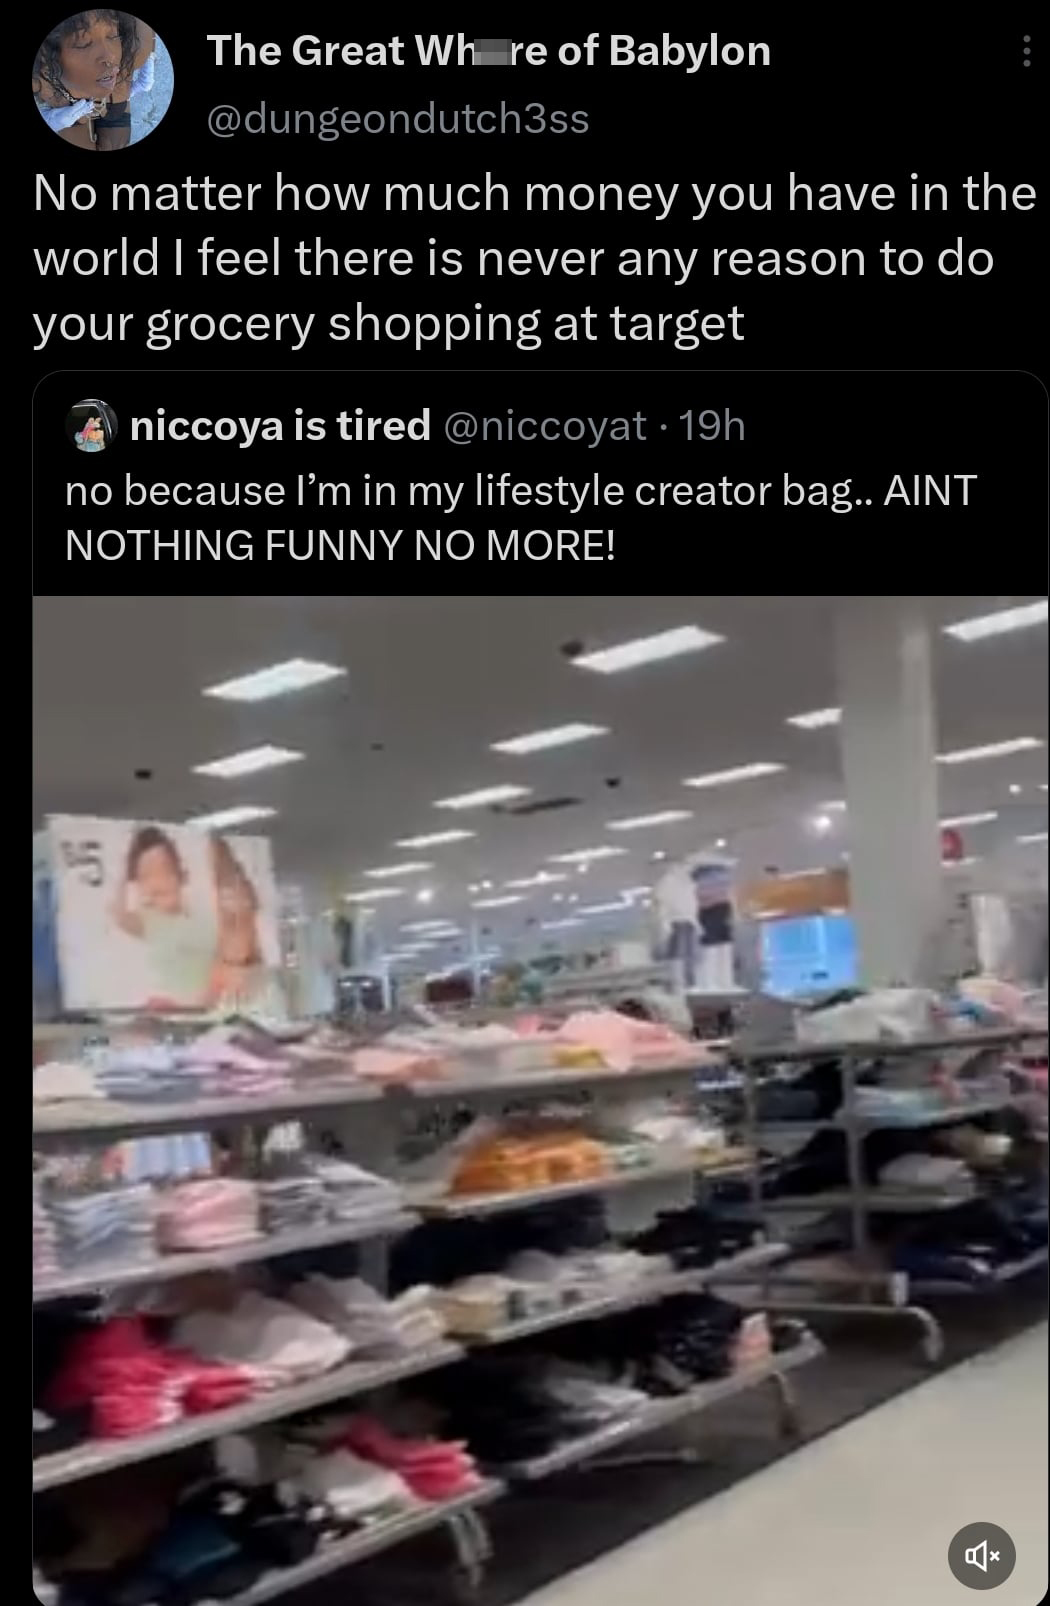 funny tweets and memes - retail - The Great Whre of Babylon No matter how much money you have in the world I feel there is never any reason to do your grocery shopping at target niccoya is tired 19h no because I'm in my lifestyle creator bag.. Aint Nothin